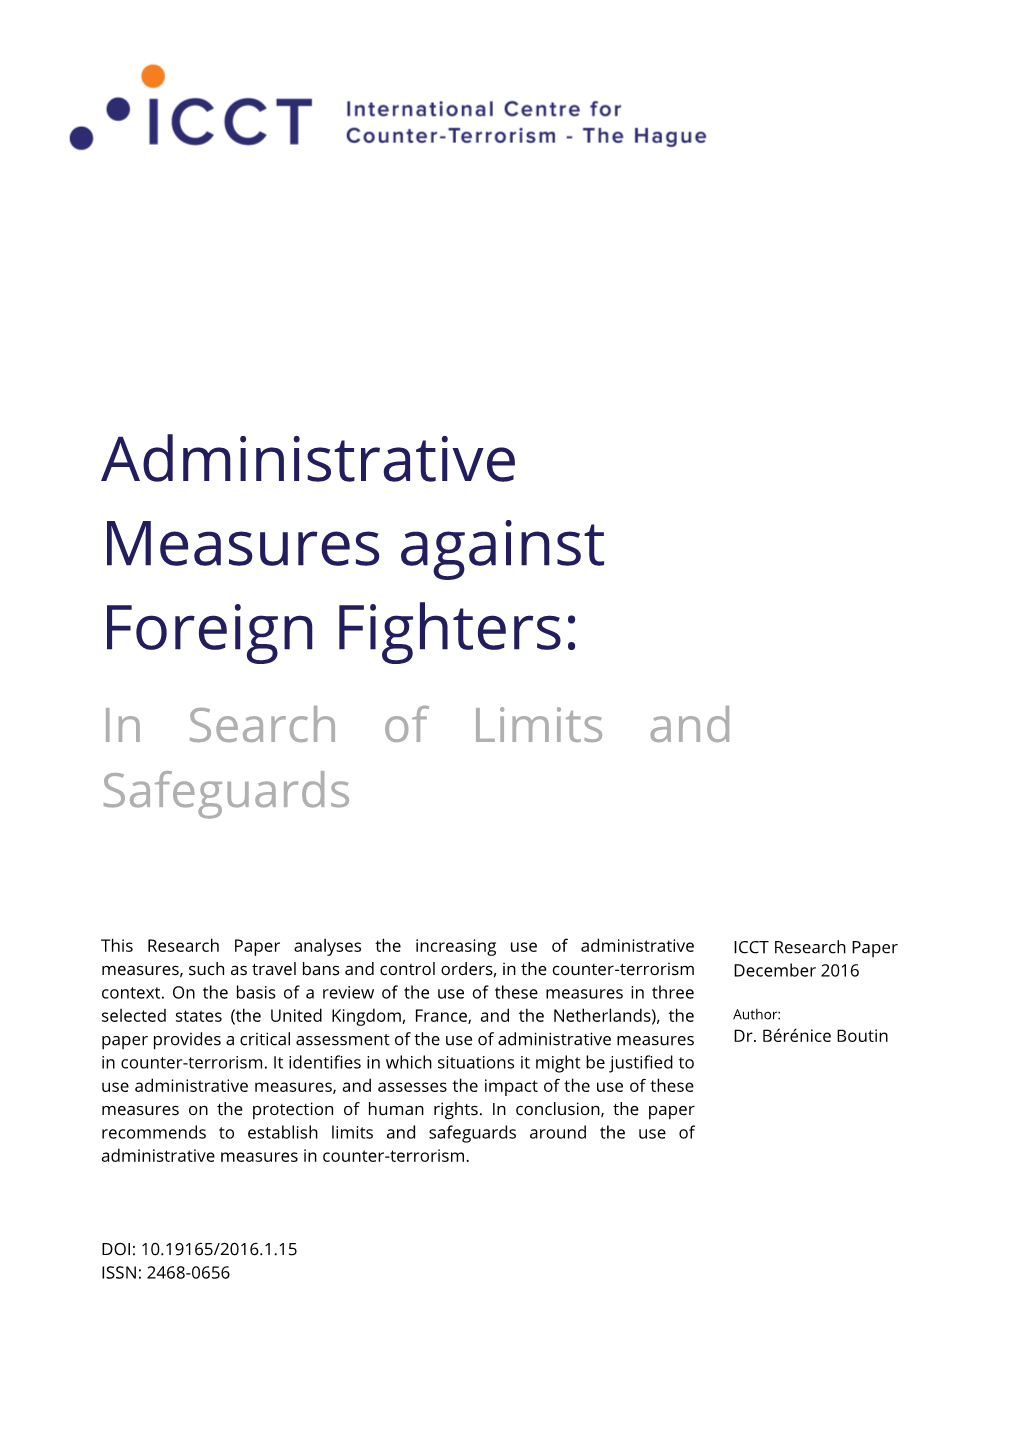 Administrative Measures Against Foreign Fighters